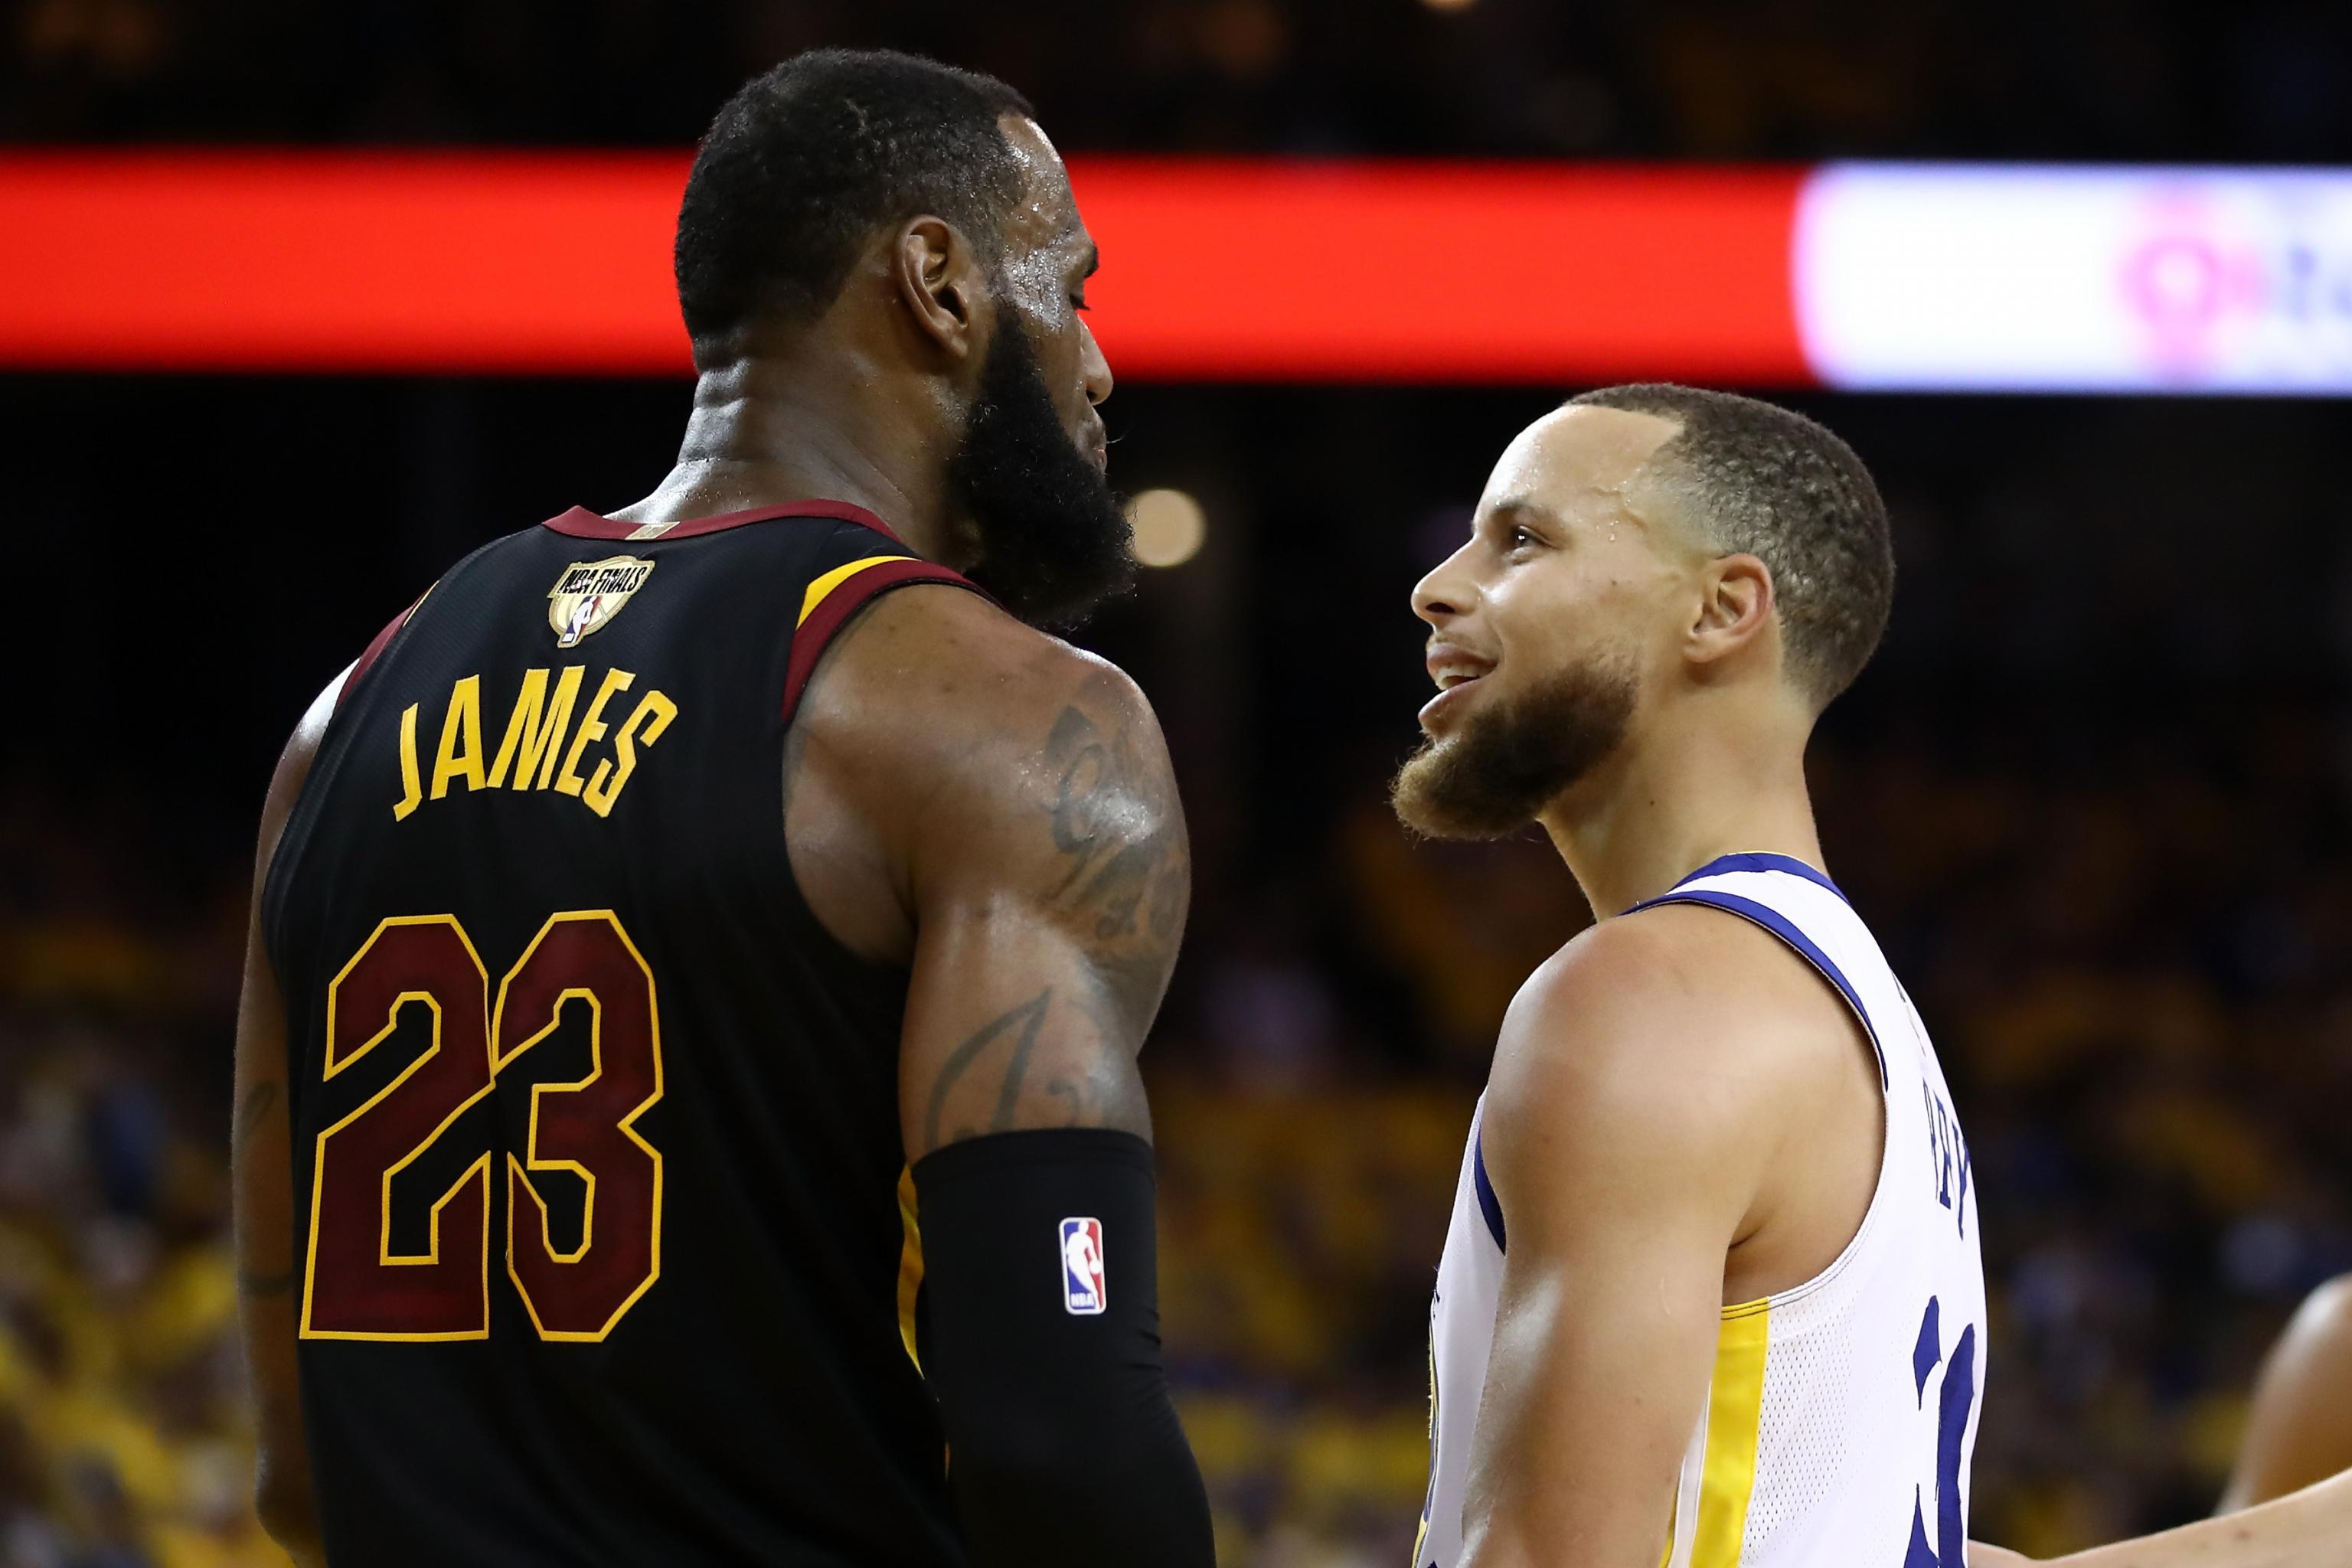 What LeBron James Said About Playing With Stephen Curry